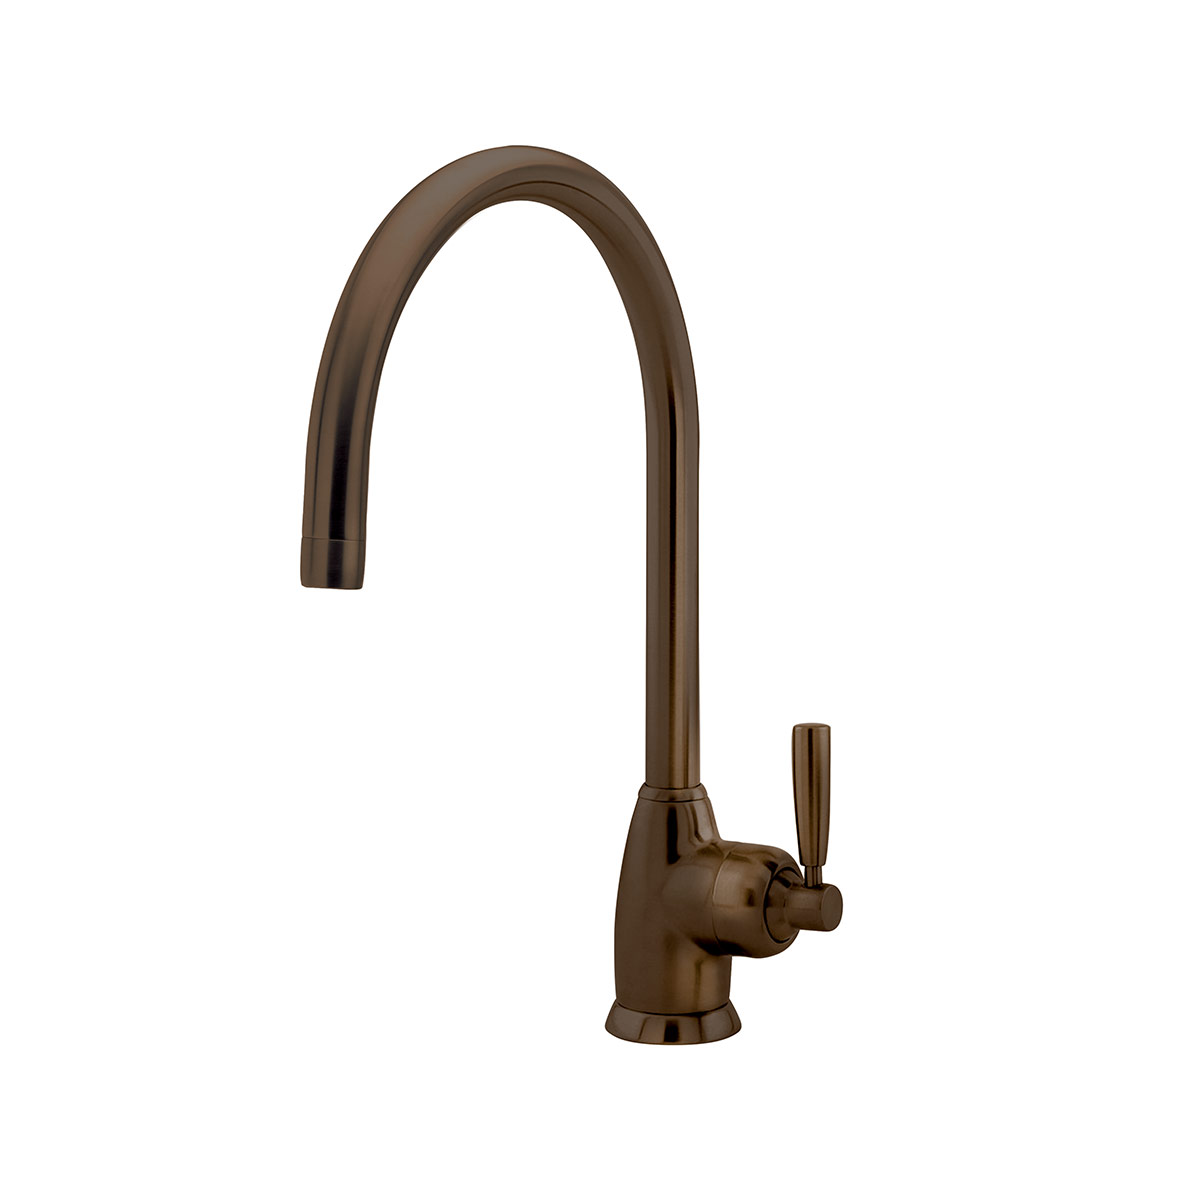 Shaws by Perrin & Rowe Roeburn kitchen mixer in English Bronze. Mimas style monobloc kitchen tap AUSH.4841. Distributed in Australia by Luxe by Design, Brisbane.